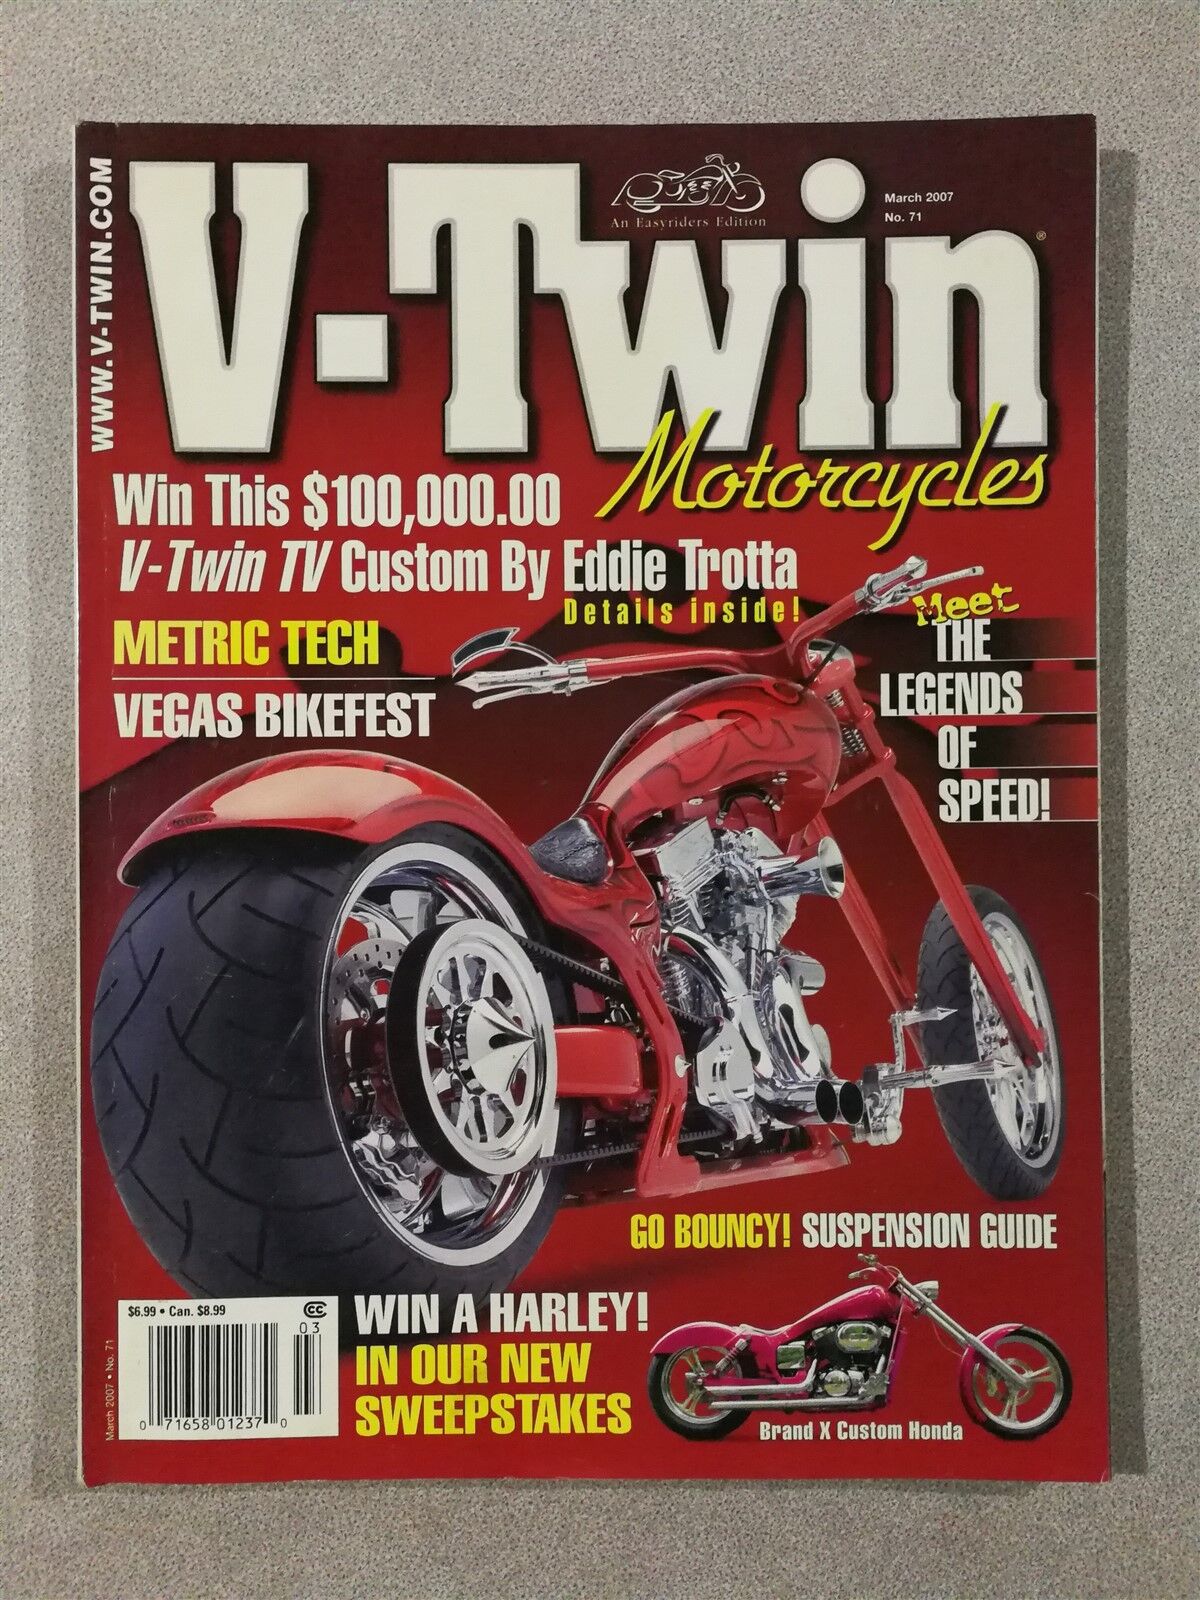 V-Twin Motorcycles Magazine March 2007 - Vegas Bikefest - The Legends of Speed